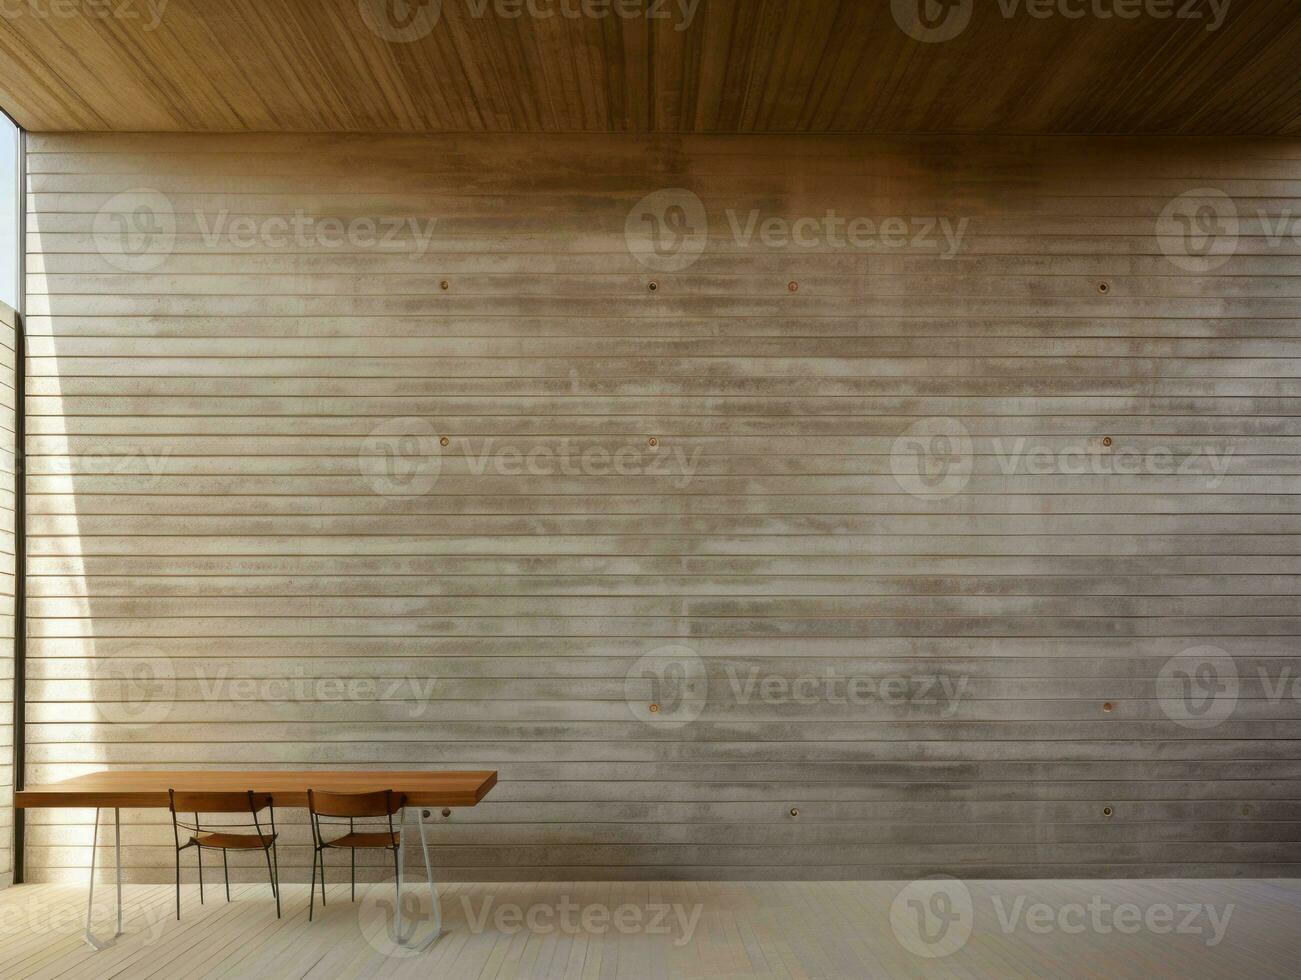 Texture of the wall adds depth and character to the structure AI Generative photo